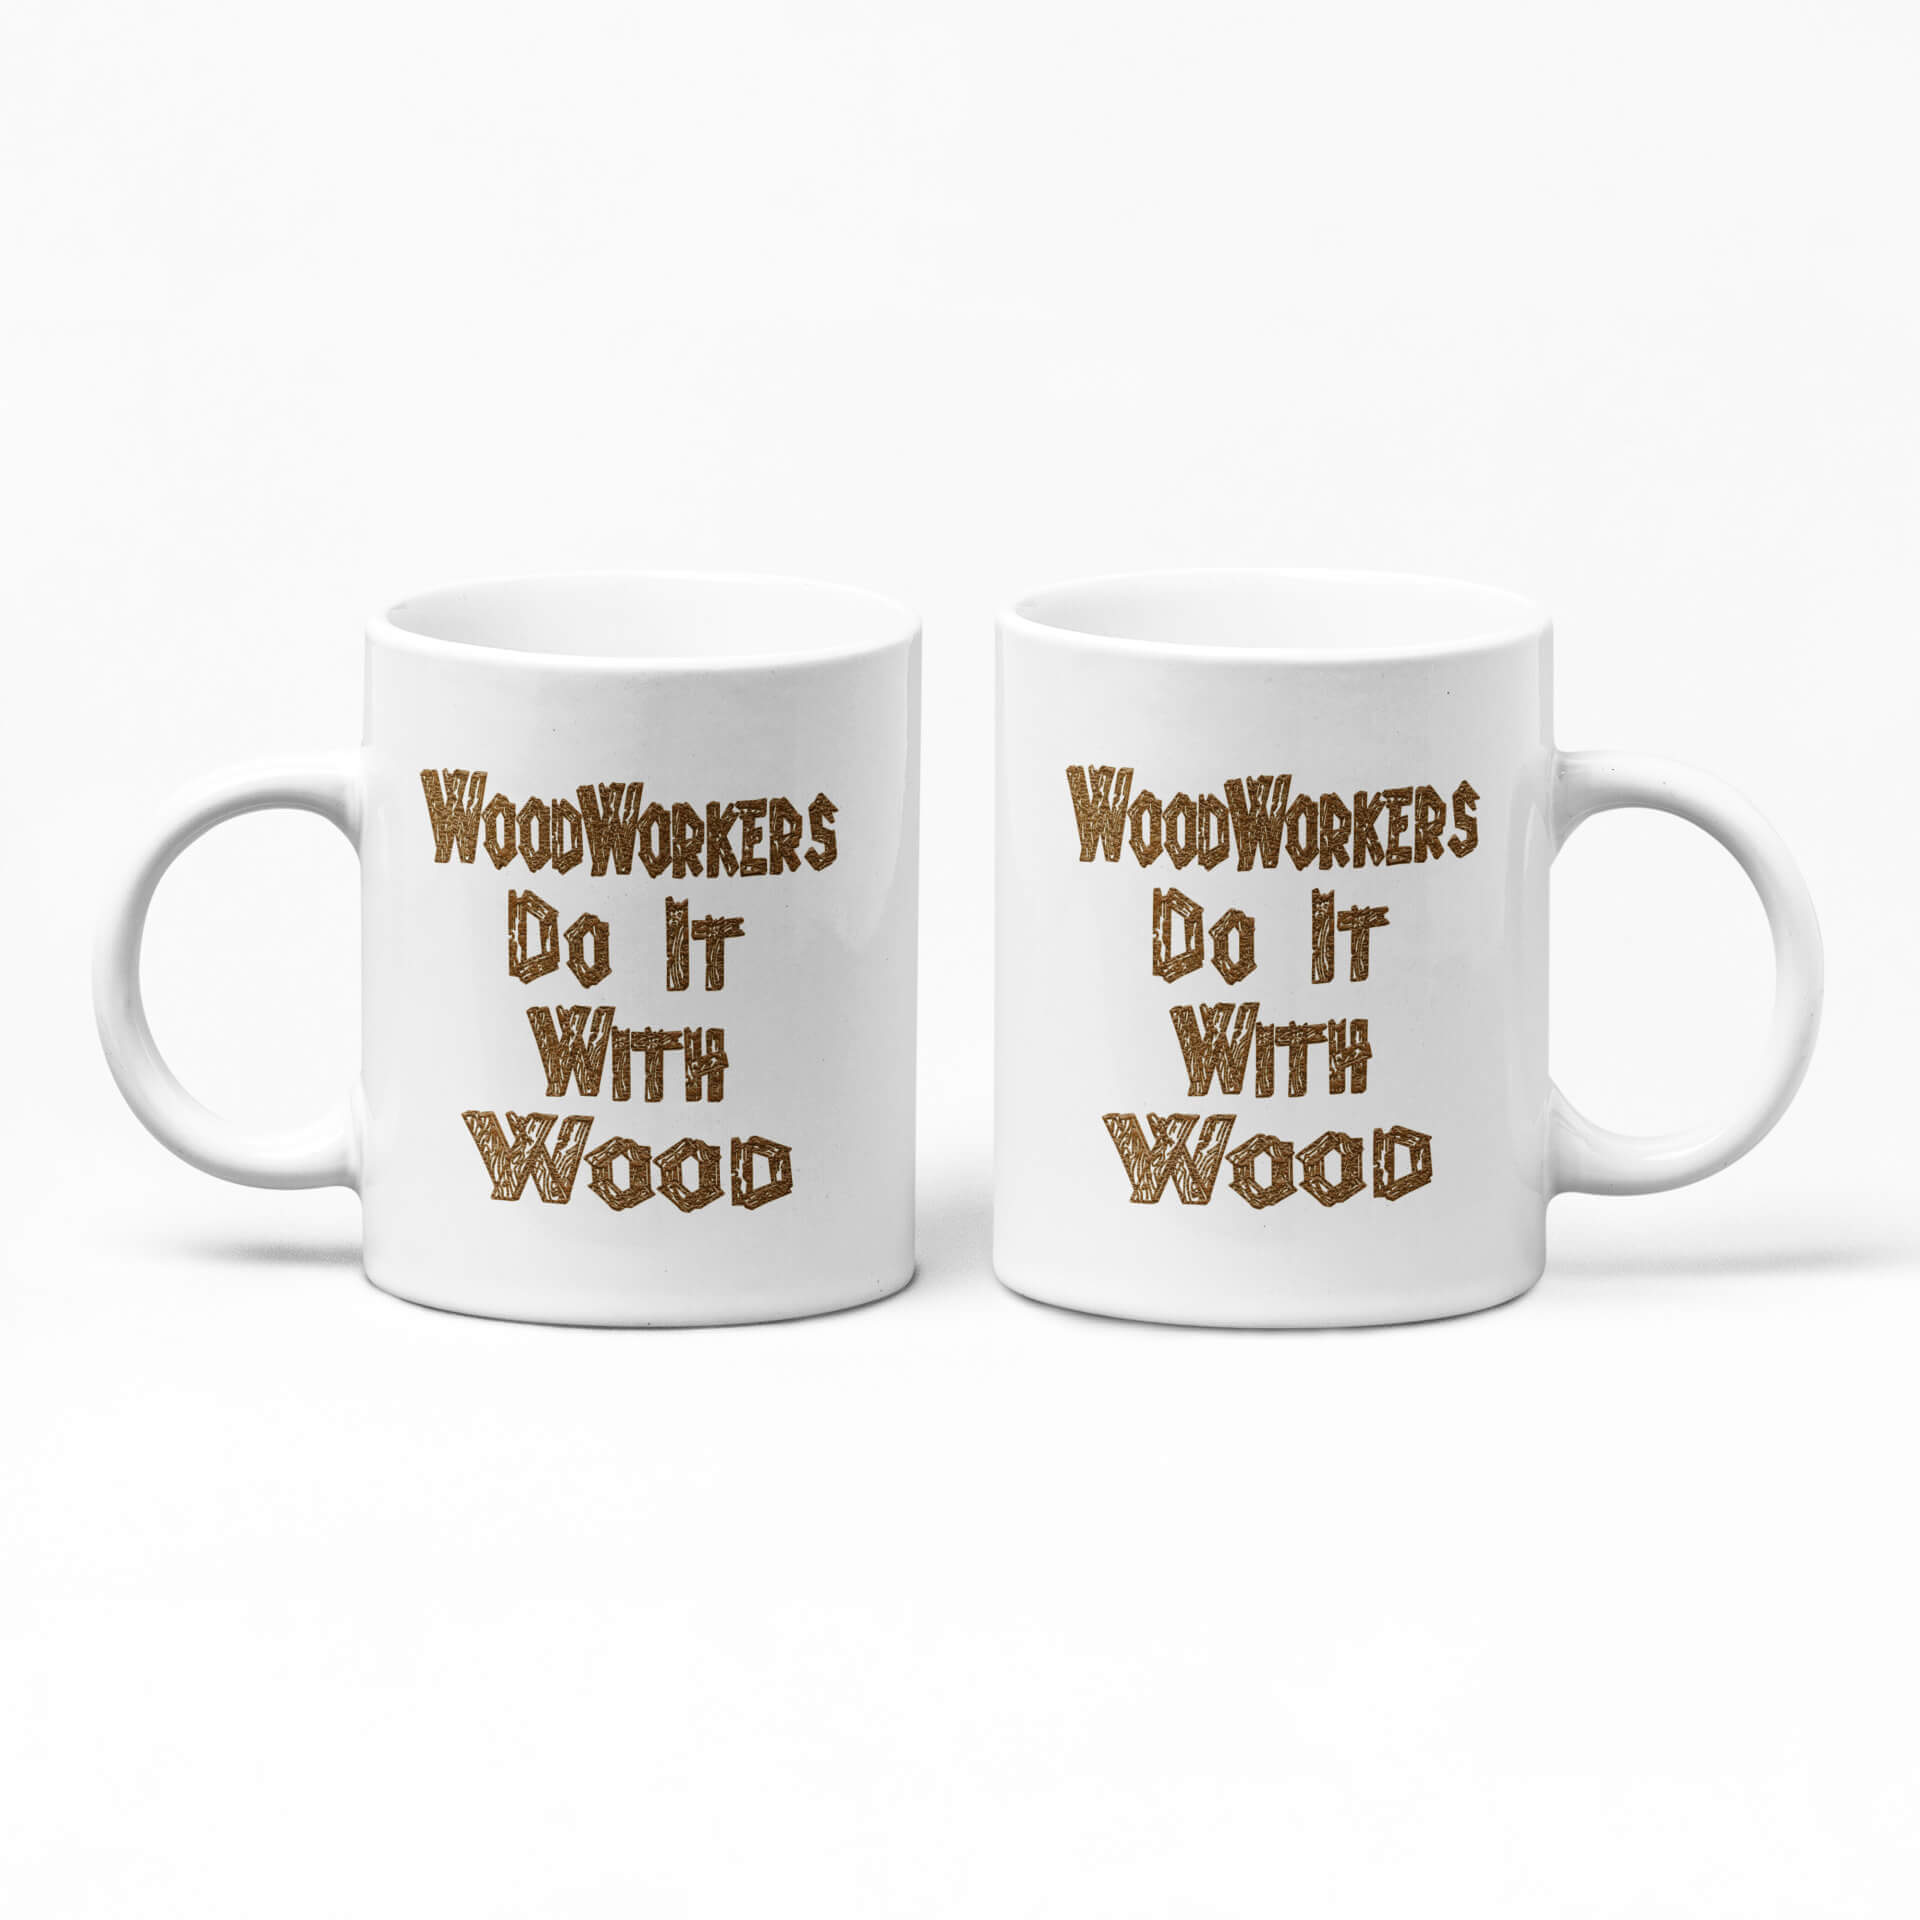 WoodWorkers Do It With Wood Mug